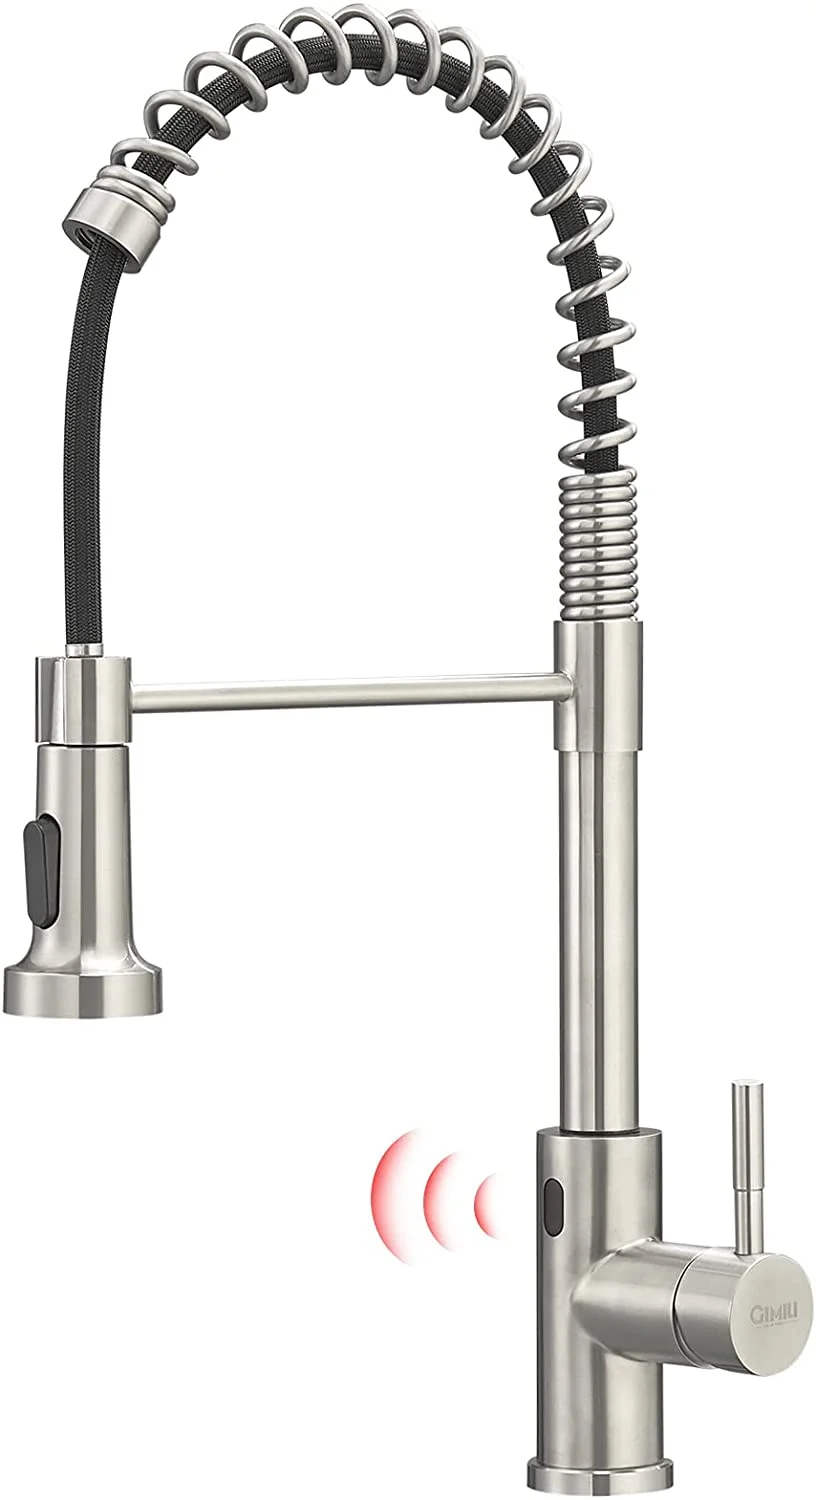 GIMILI Touchless Commercial Kitchen Sink Faucet